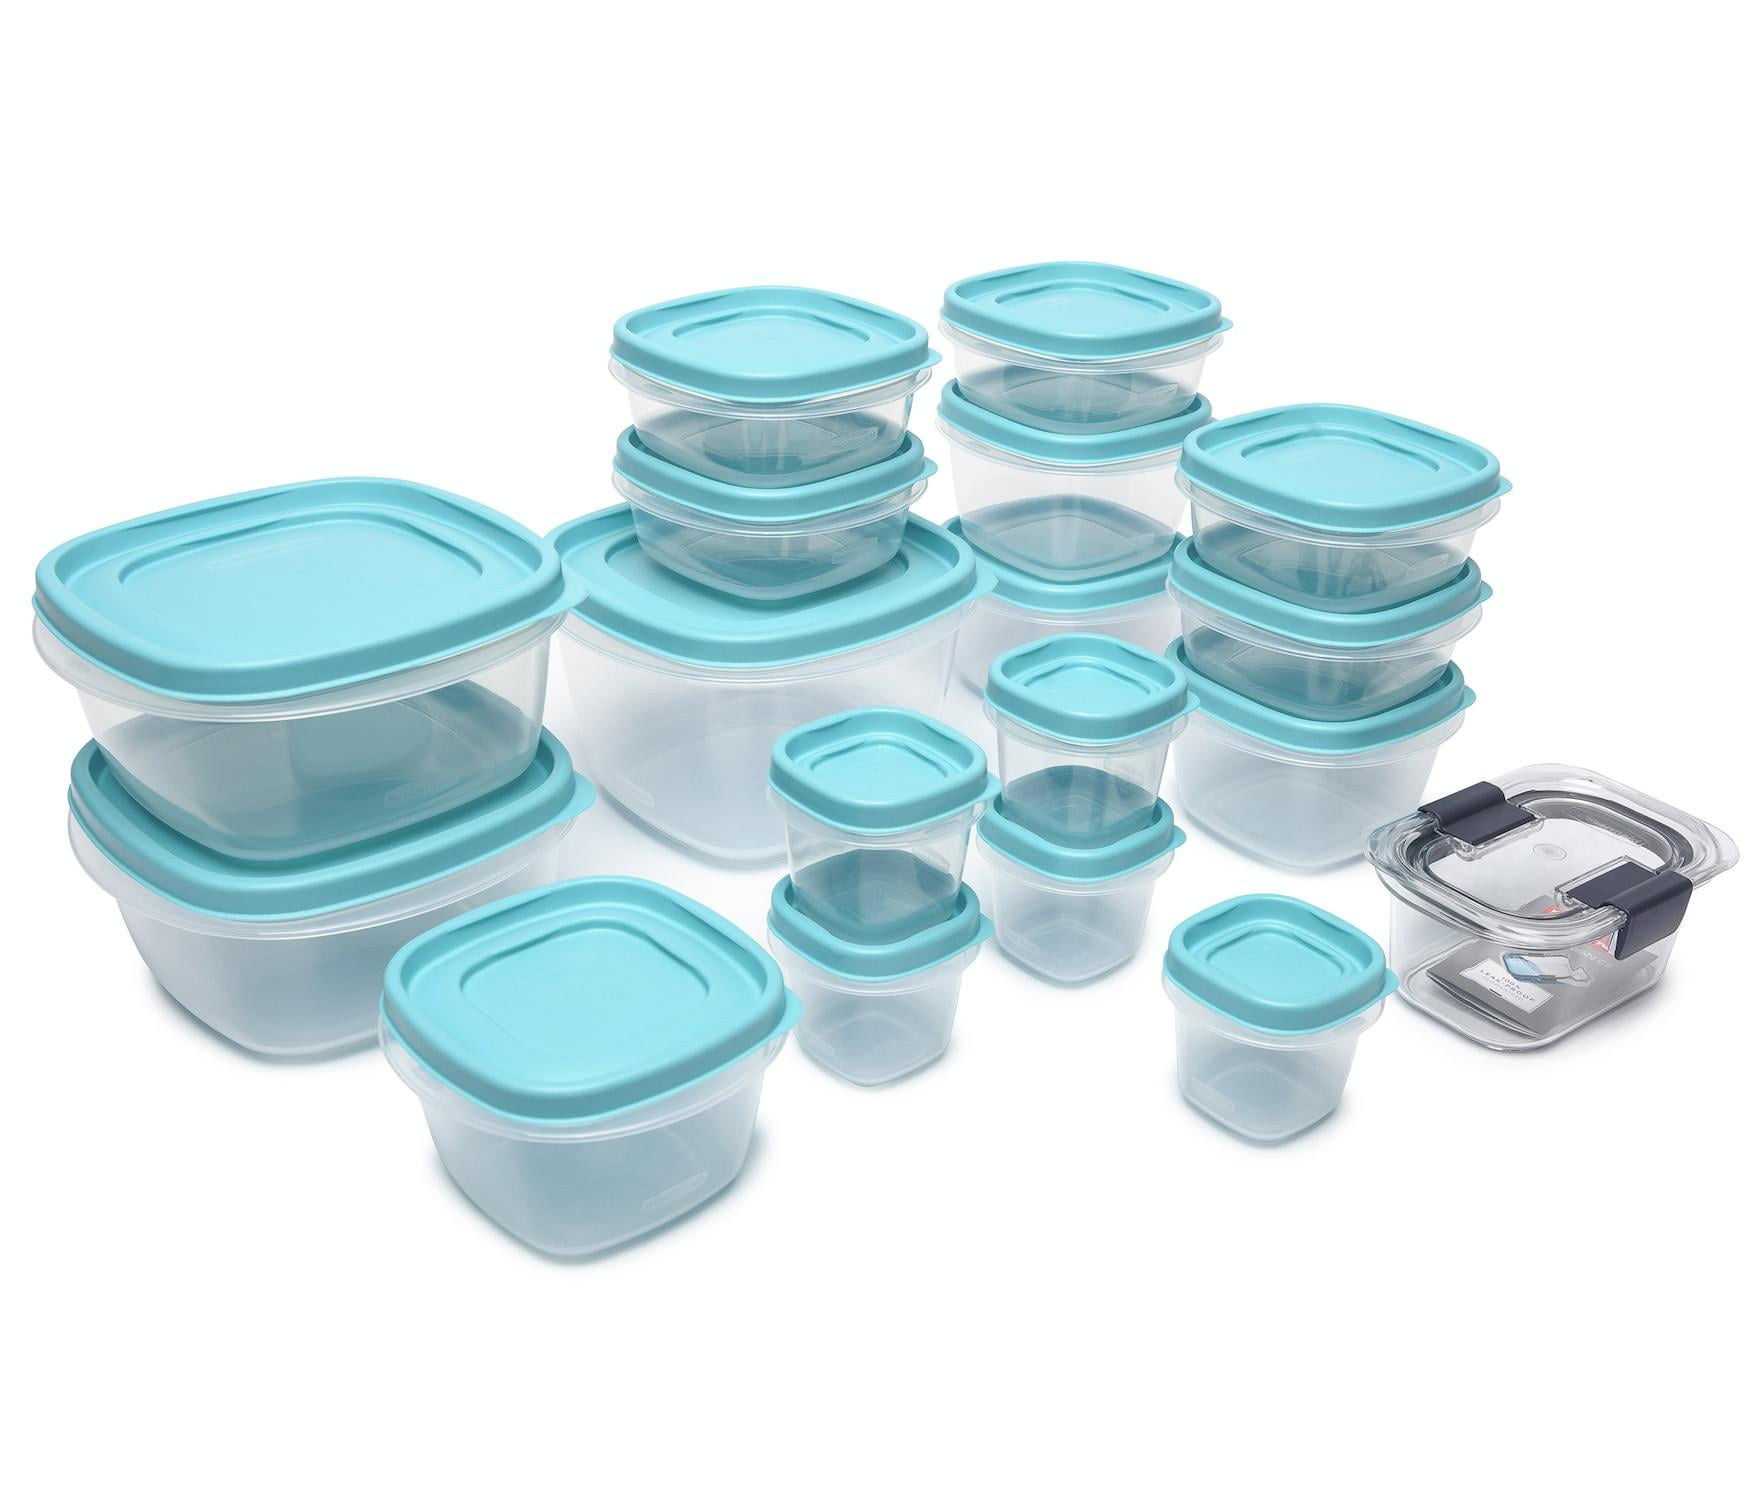 Buy Rubbermaid Easy Find Lids 36 Pcs. Food Storage Container Set